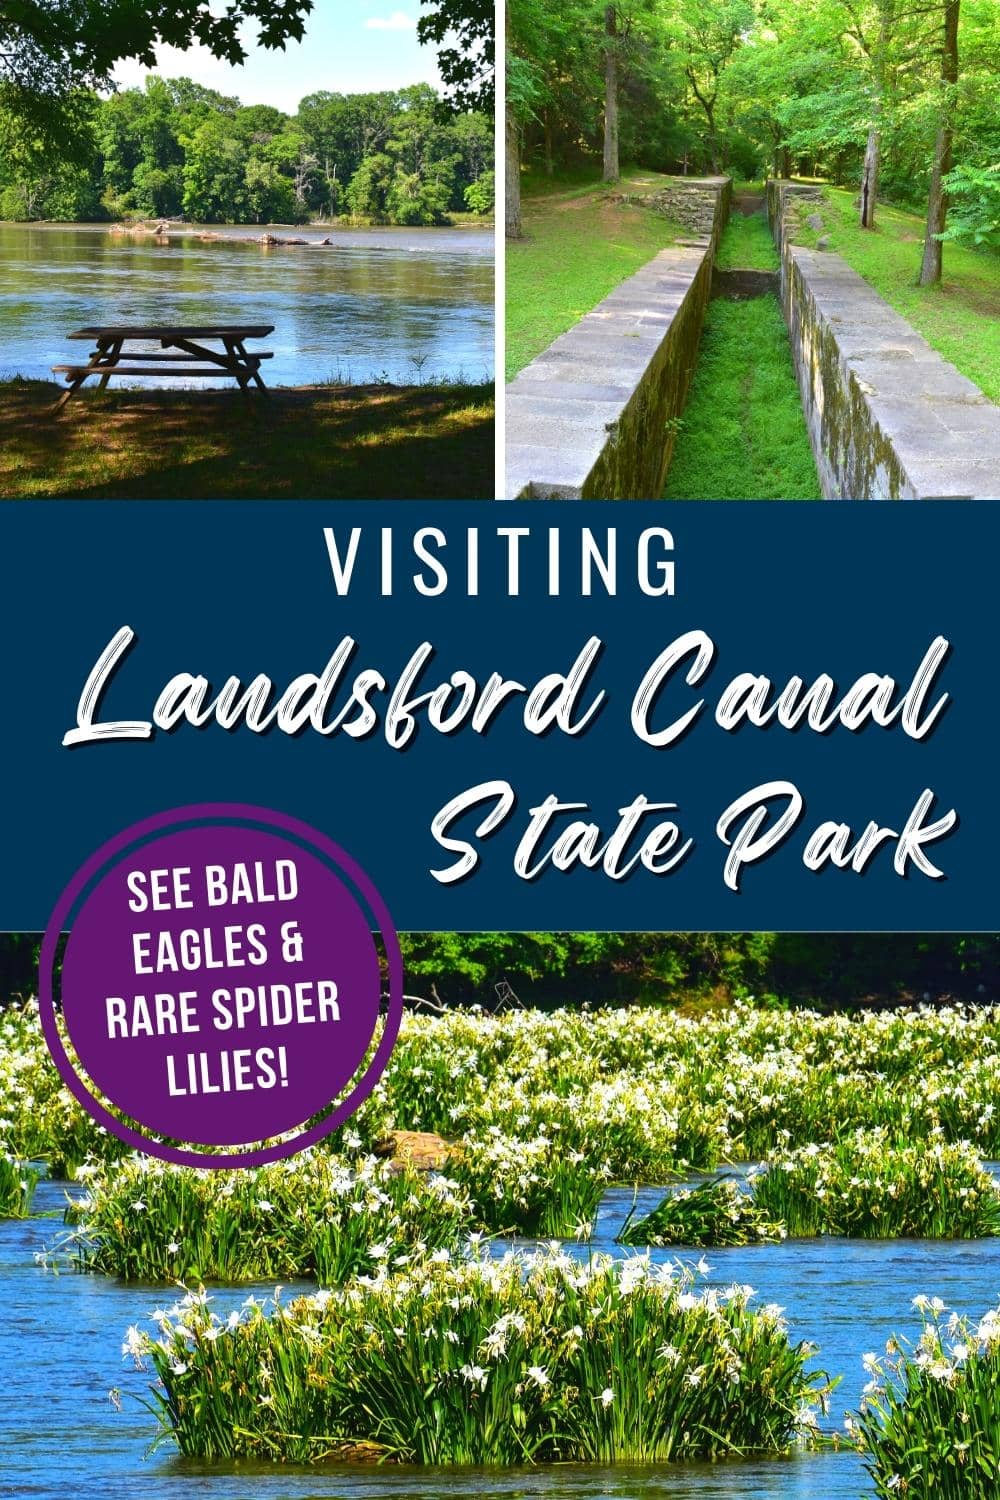 Guide to Visiting Landsford Canal State Park